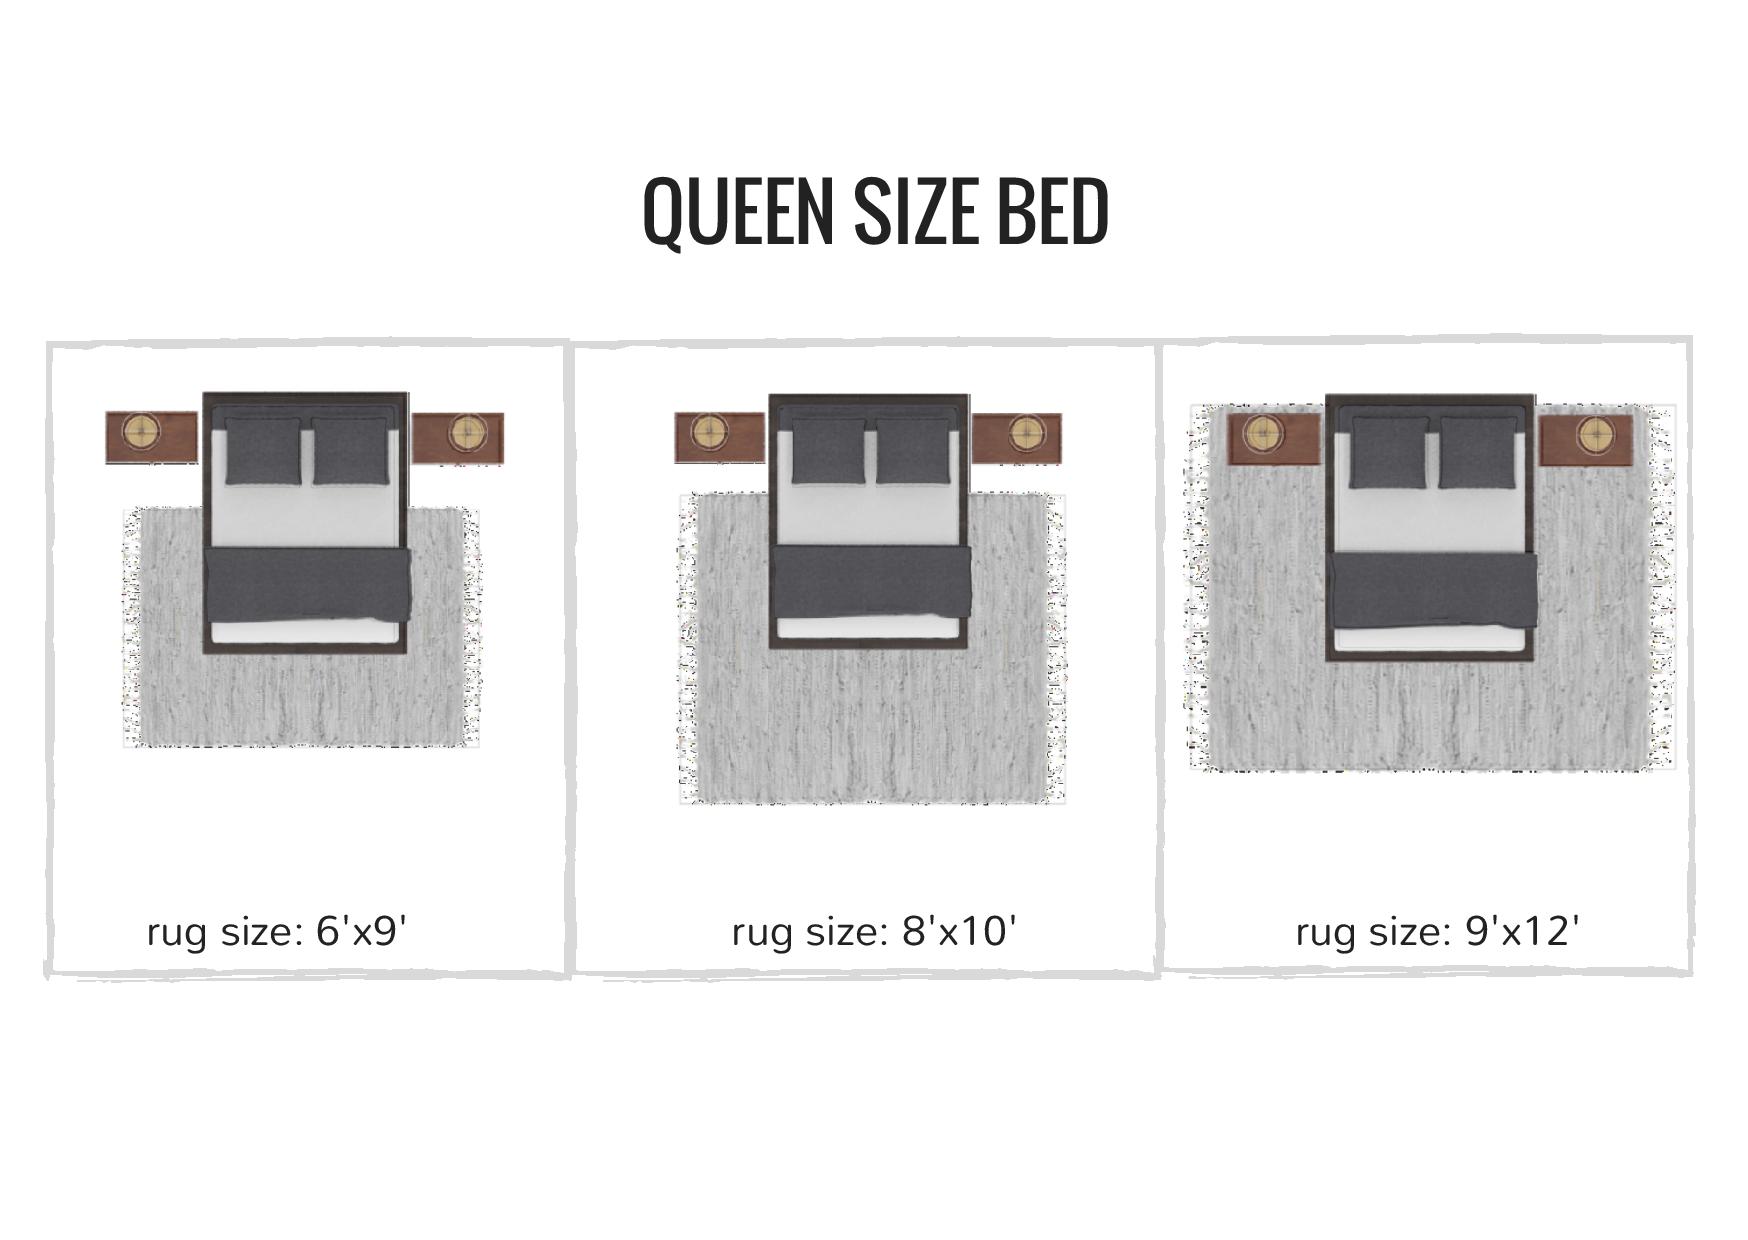 rug sizing and placement guide - what size rug do you need for your queen size bed / bedroom